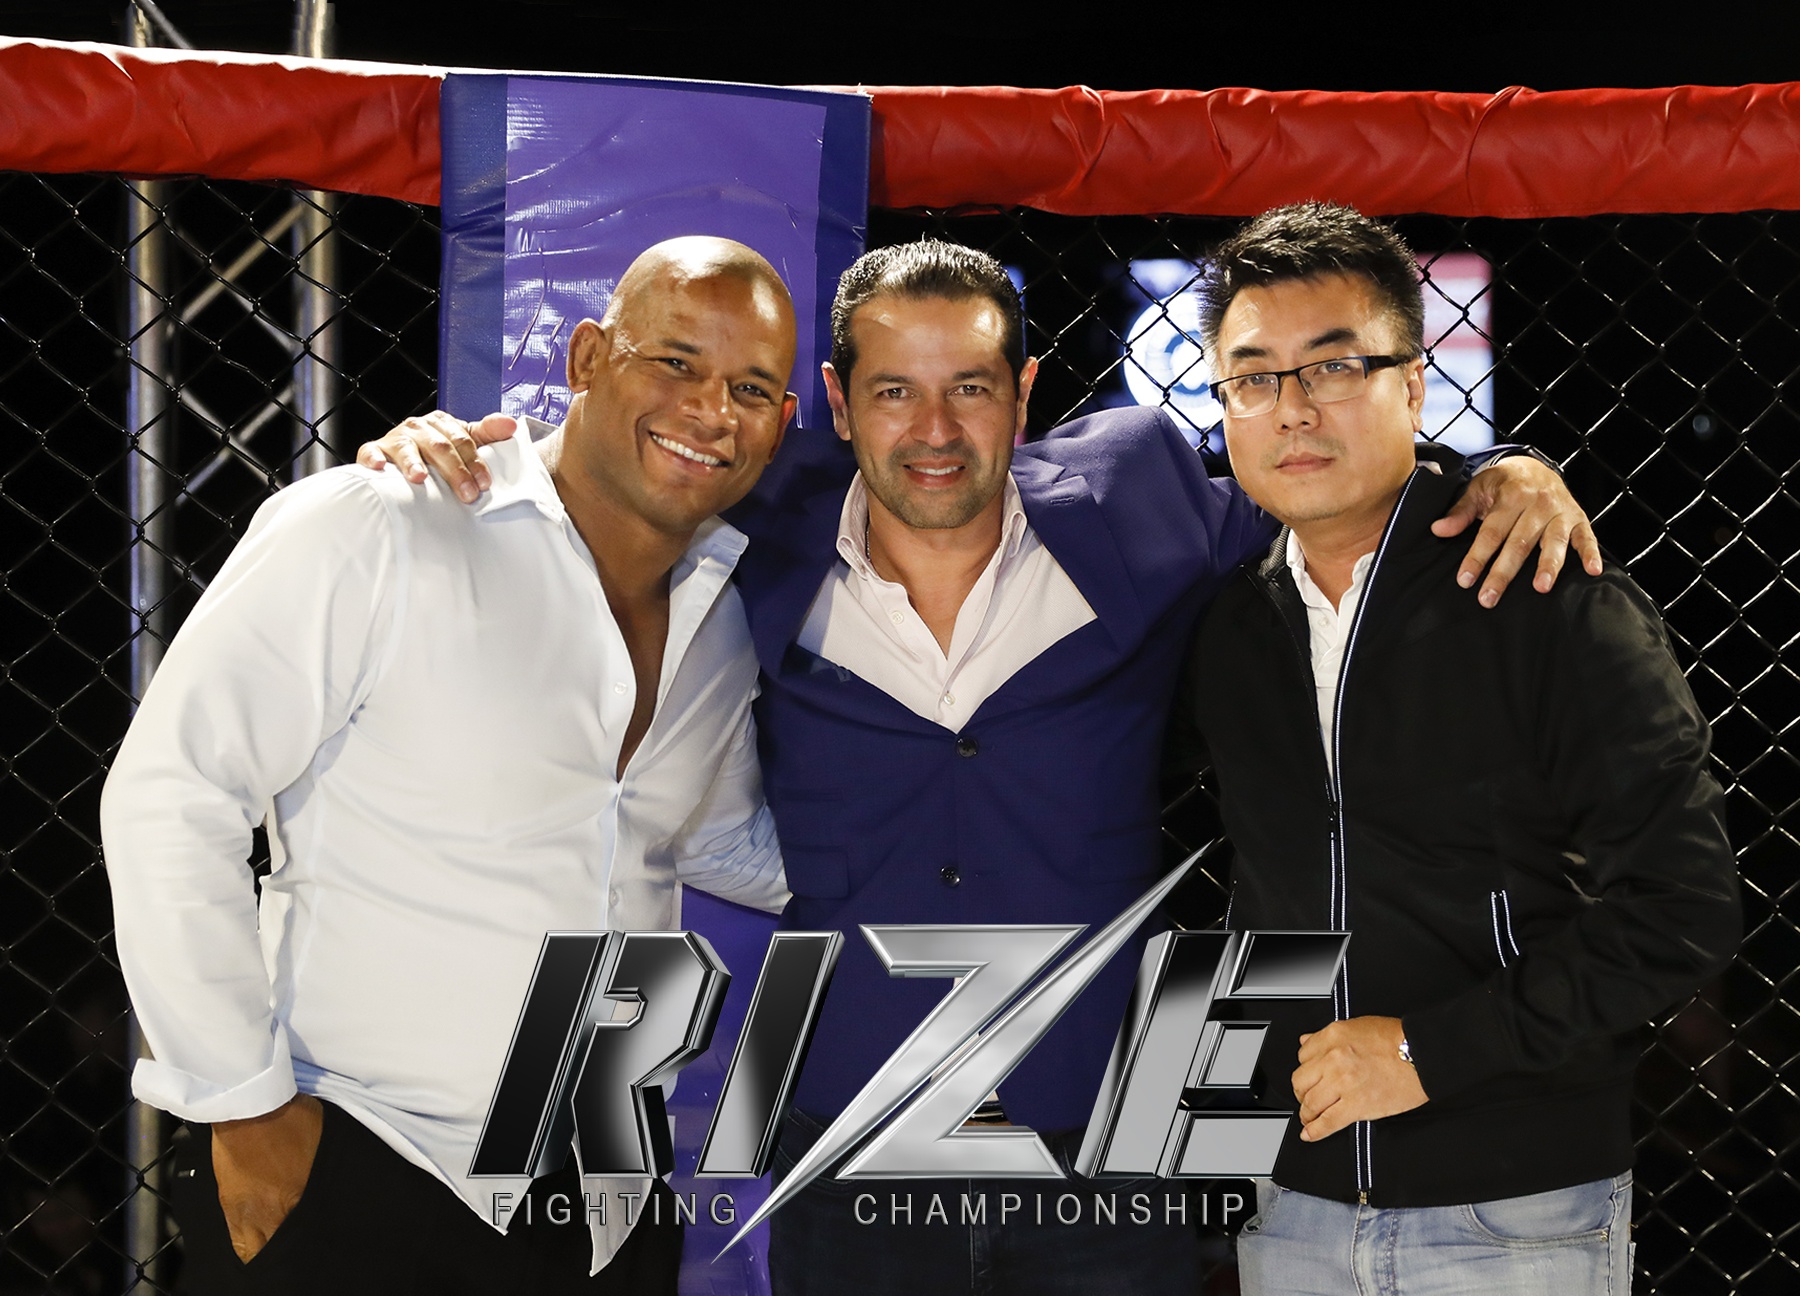 Rize Fighting Championship Begins